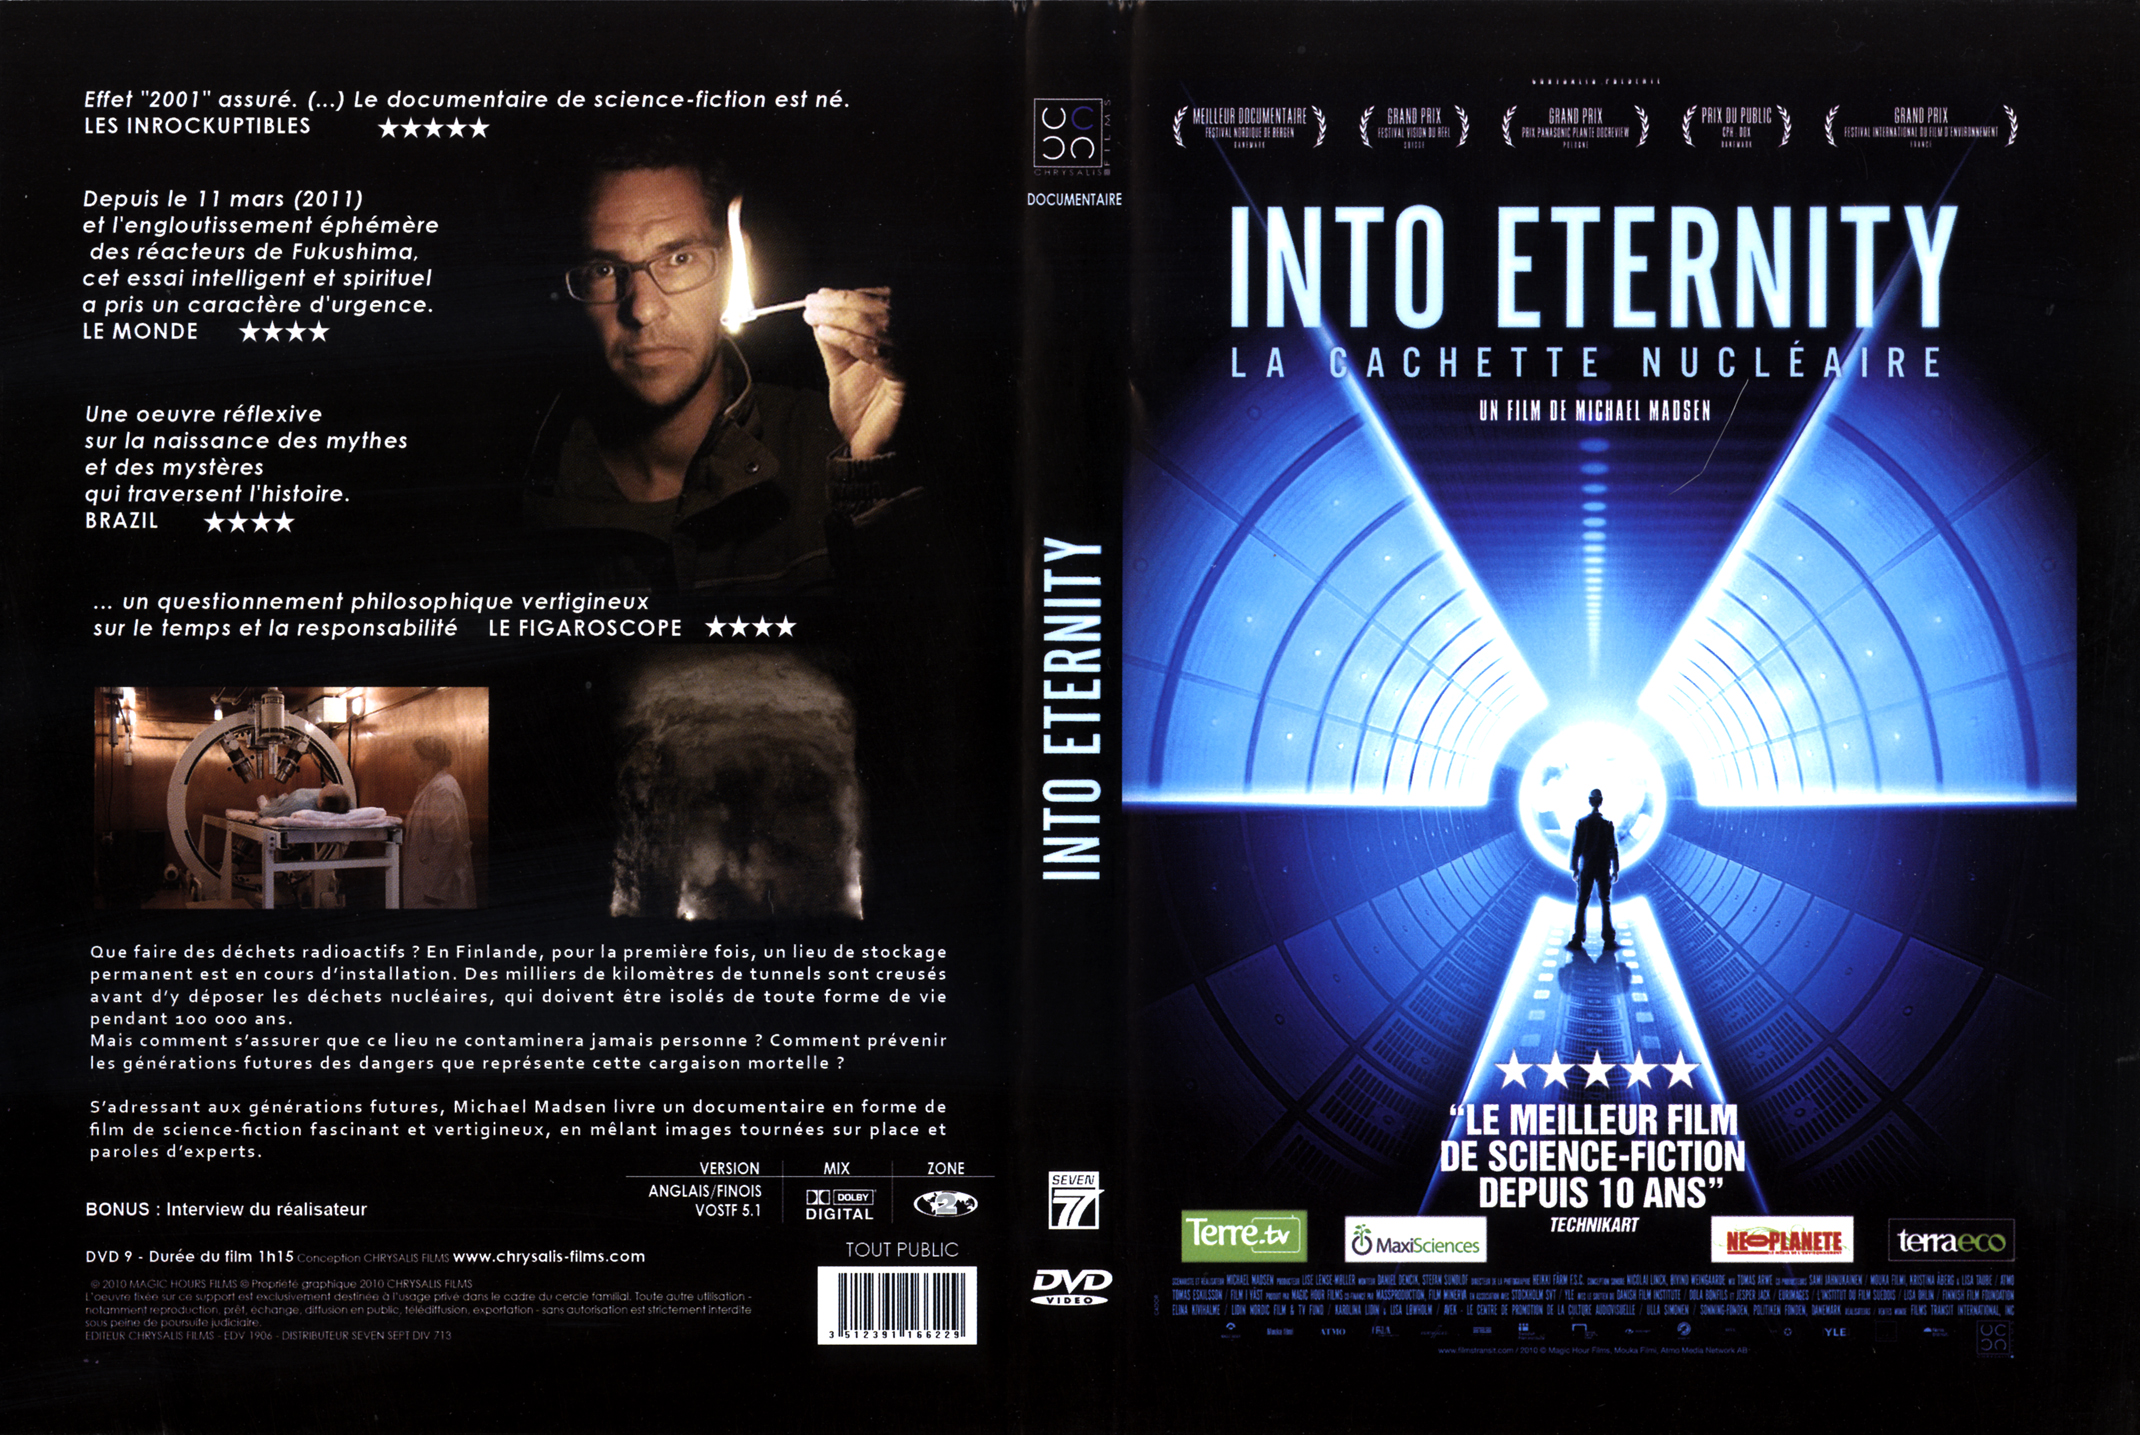 Jaquette DVD Into Eternity